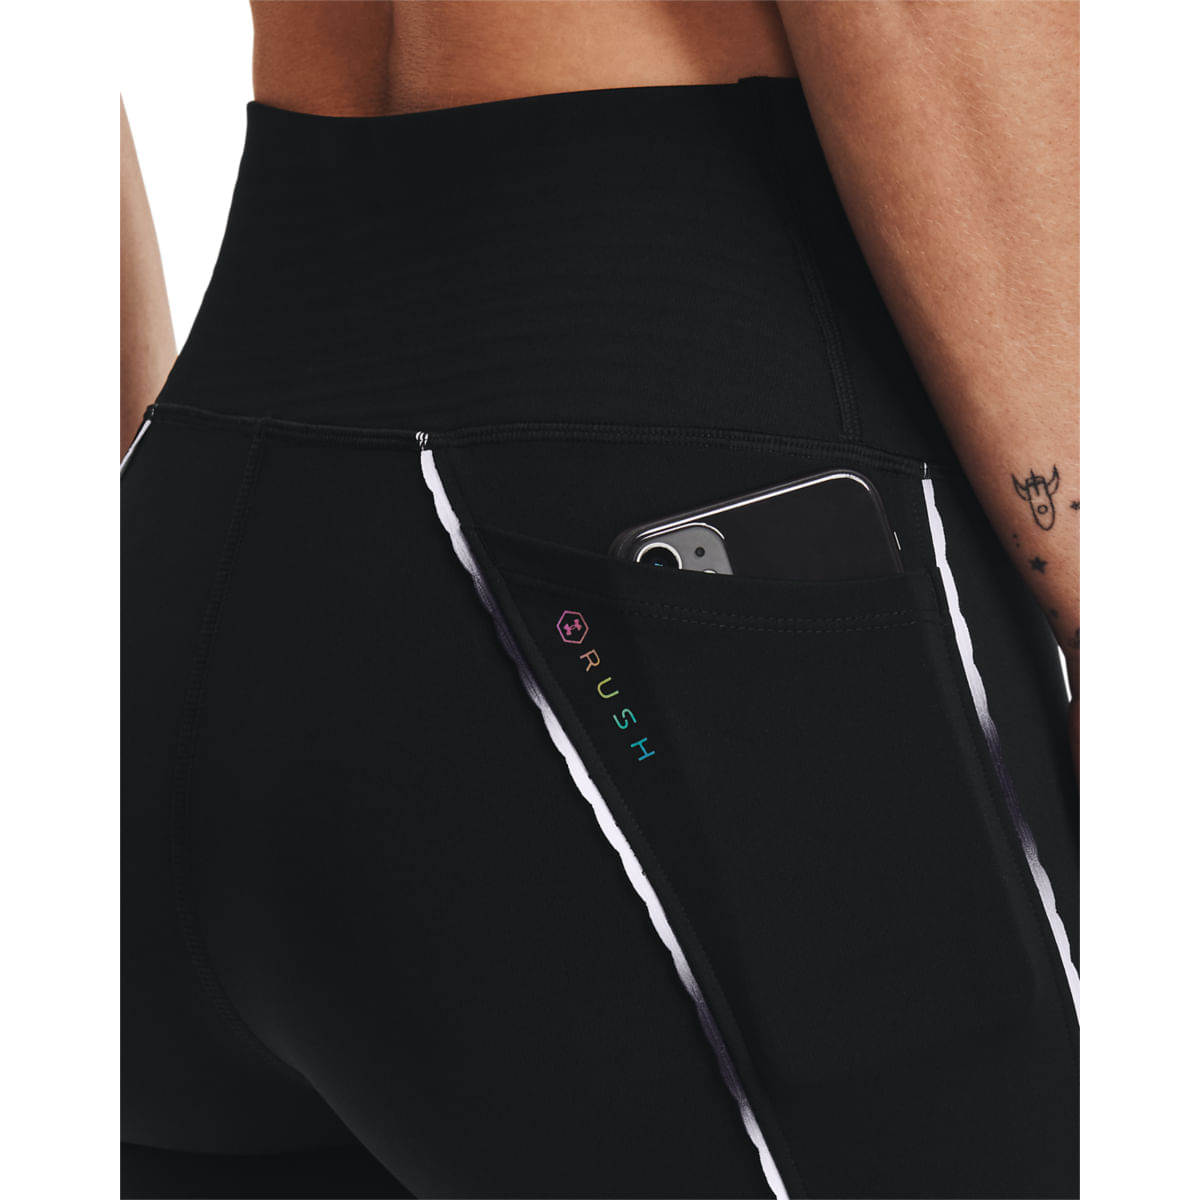 Under Armour Rush Scallop Pocket Legging - Women's - Al's Sporting Goods:  Your One-Stop Shop for Outdoor Sports Gear & Apparel